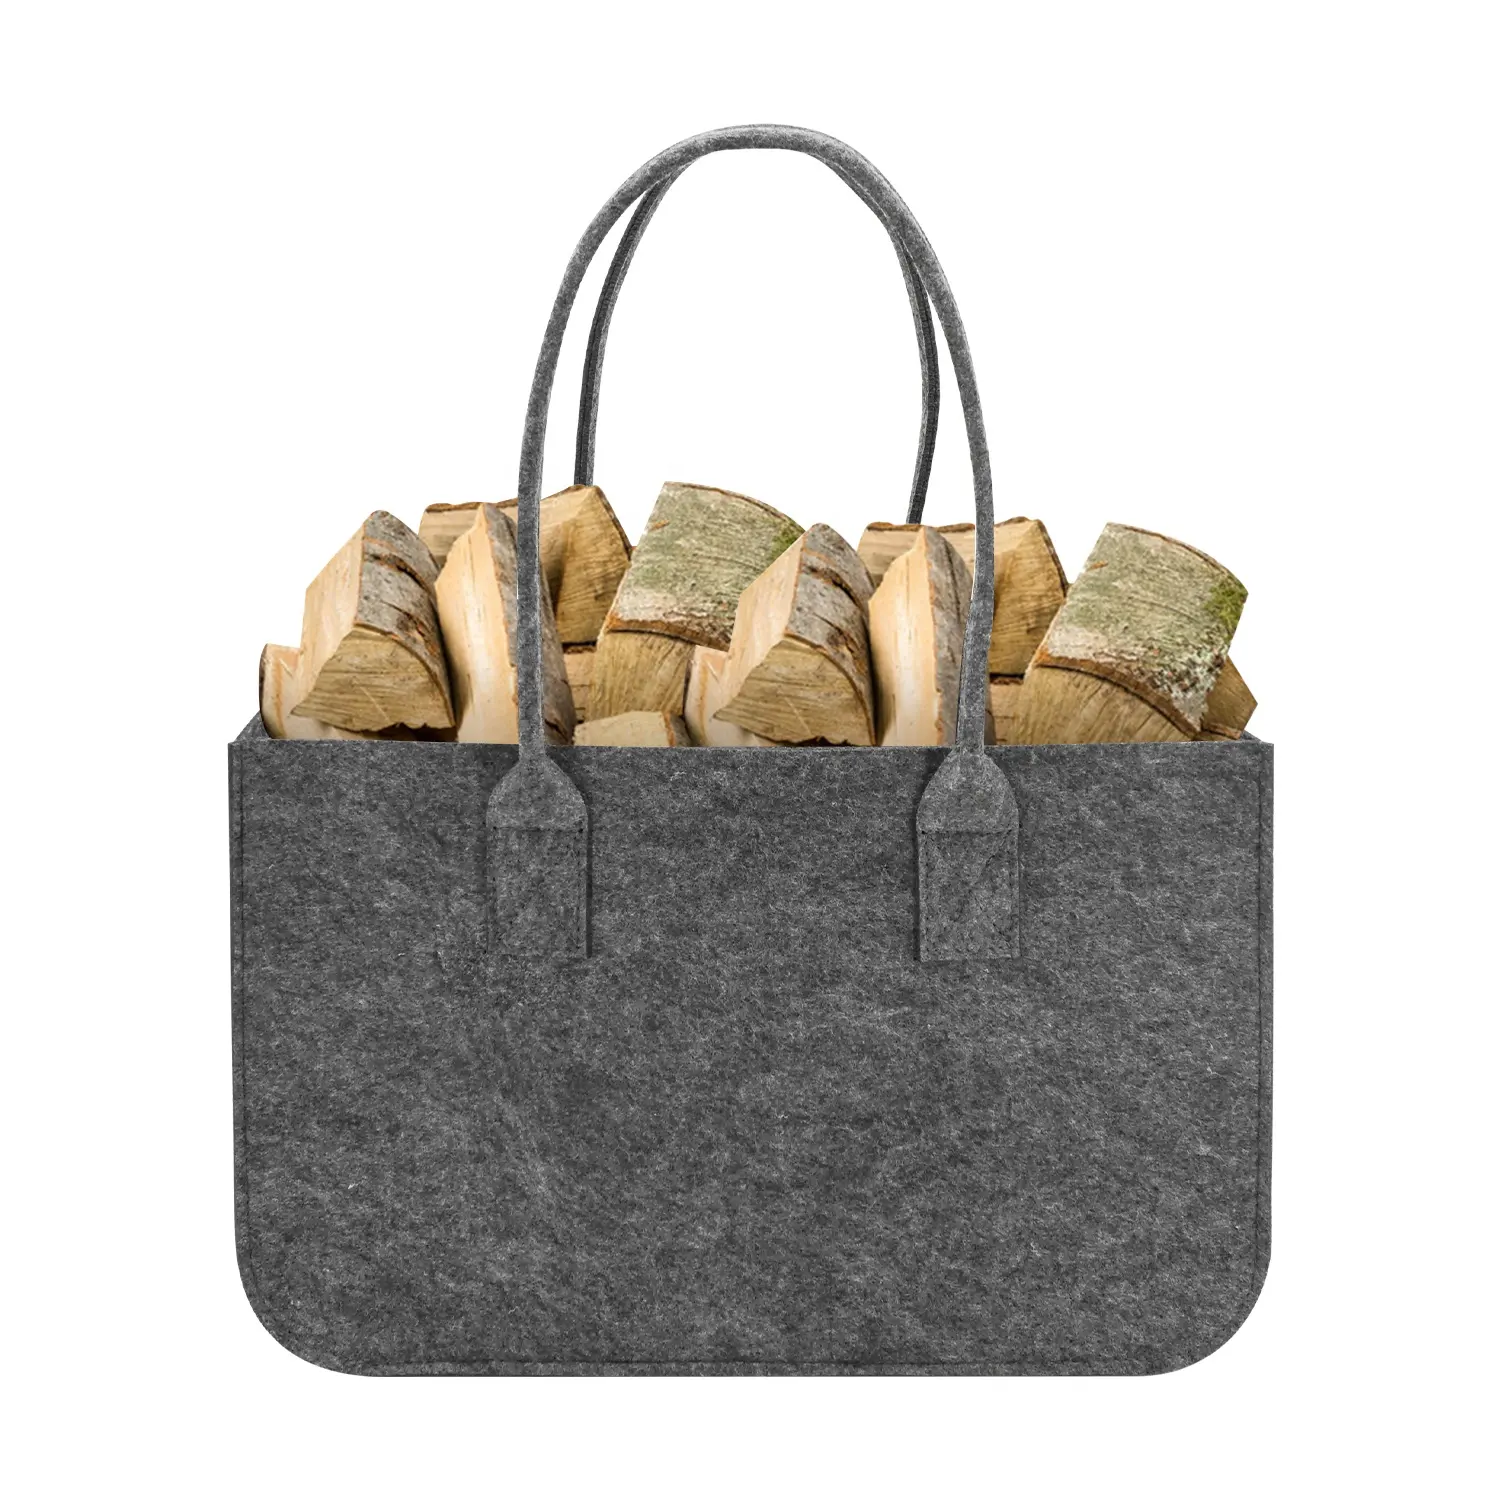 Factory price OEM best selling tote shopping bag durable polyester felt firewood storage basket